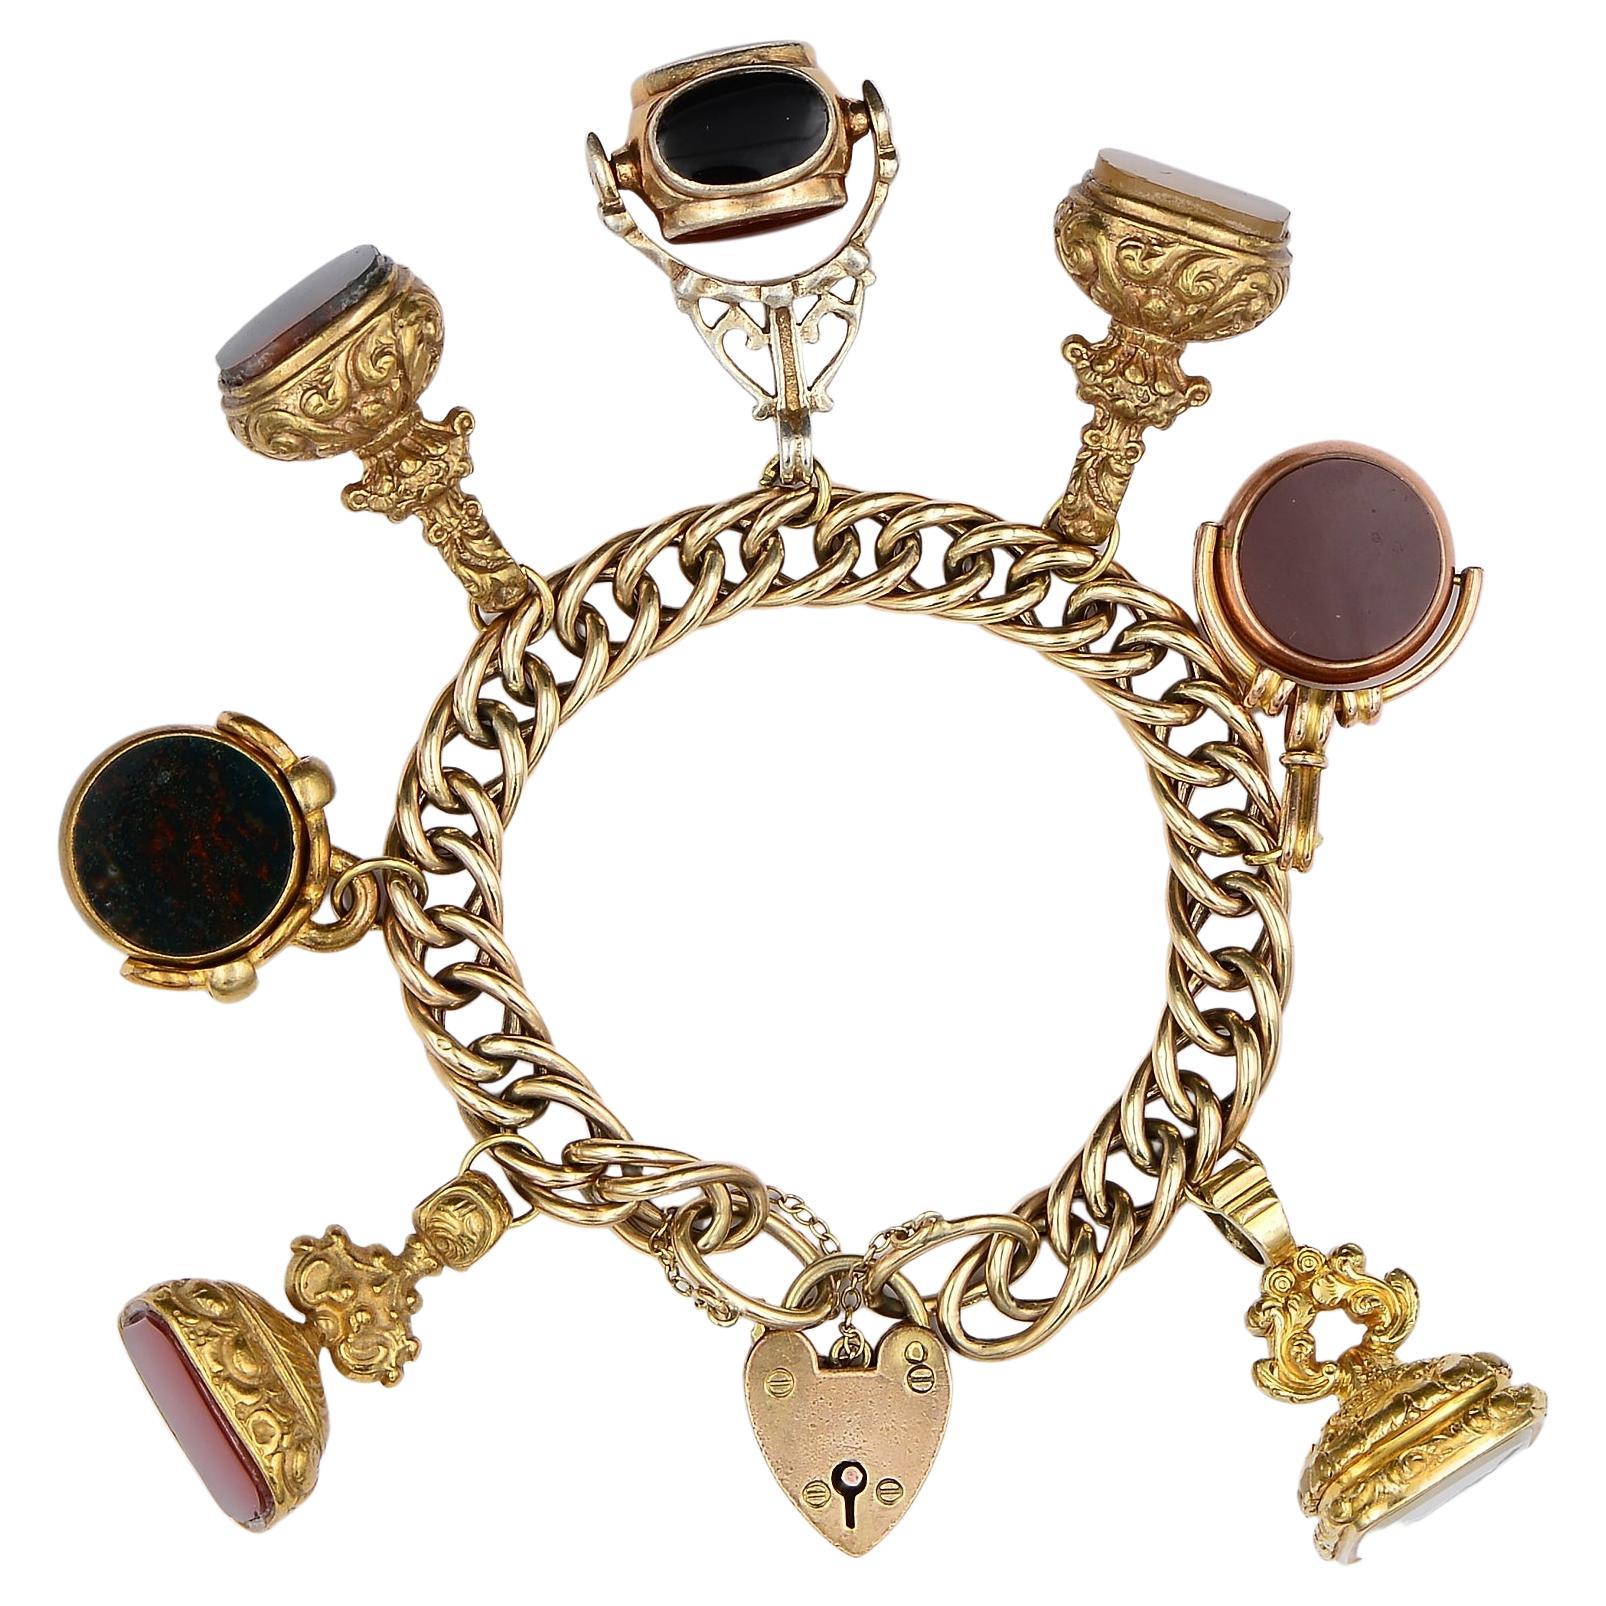 English Charm Bracelet Loaded with Fobs For Sale